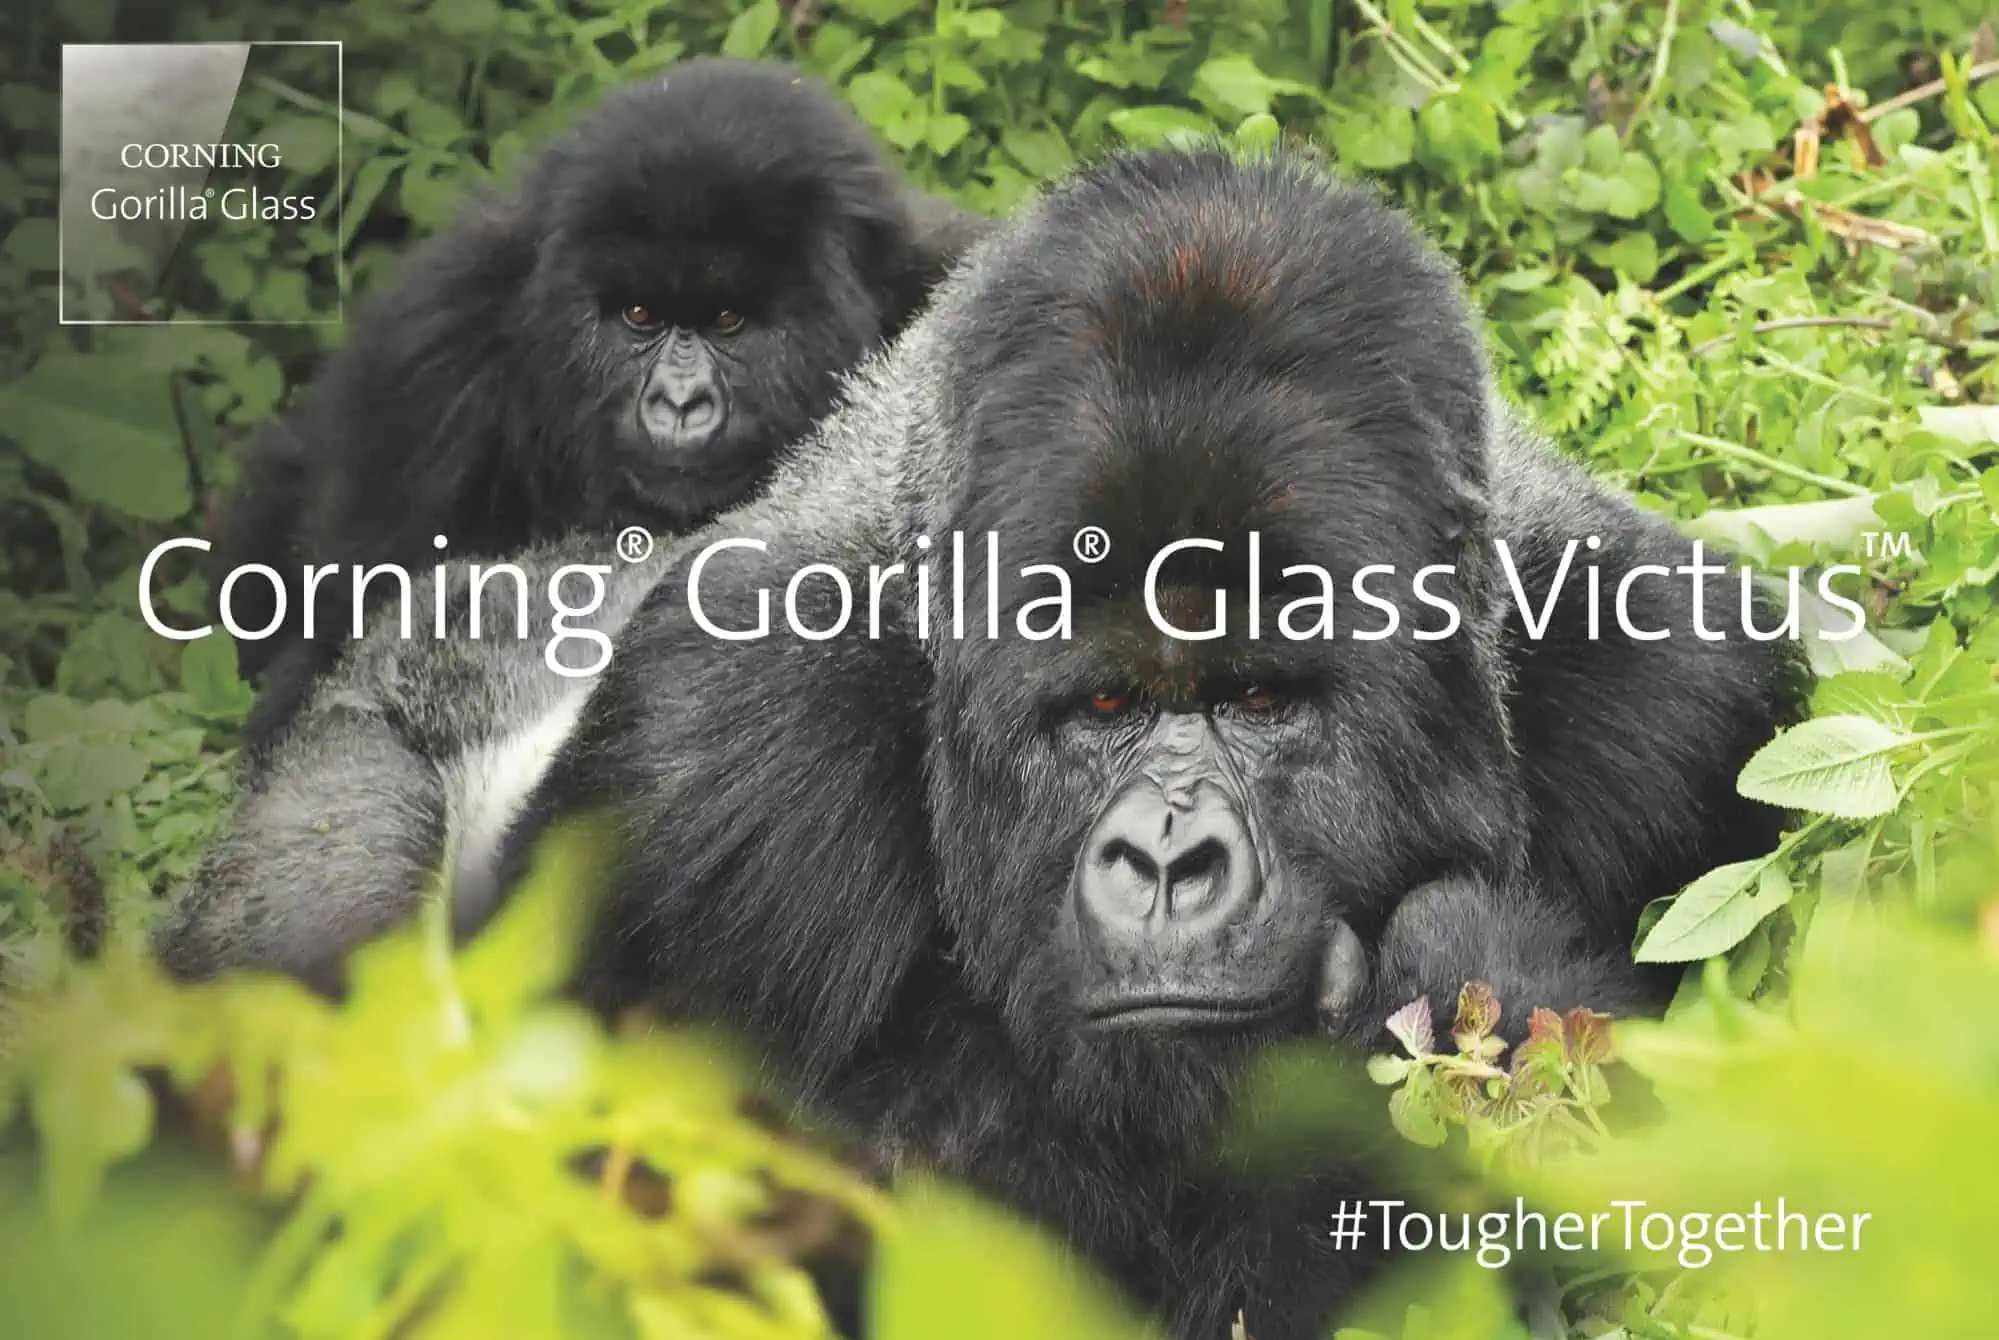 Corning’s new Gorilla Glass Victus can protect your smartphone from a 2 meters fall